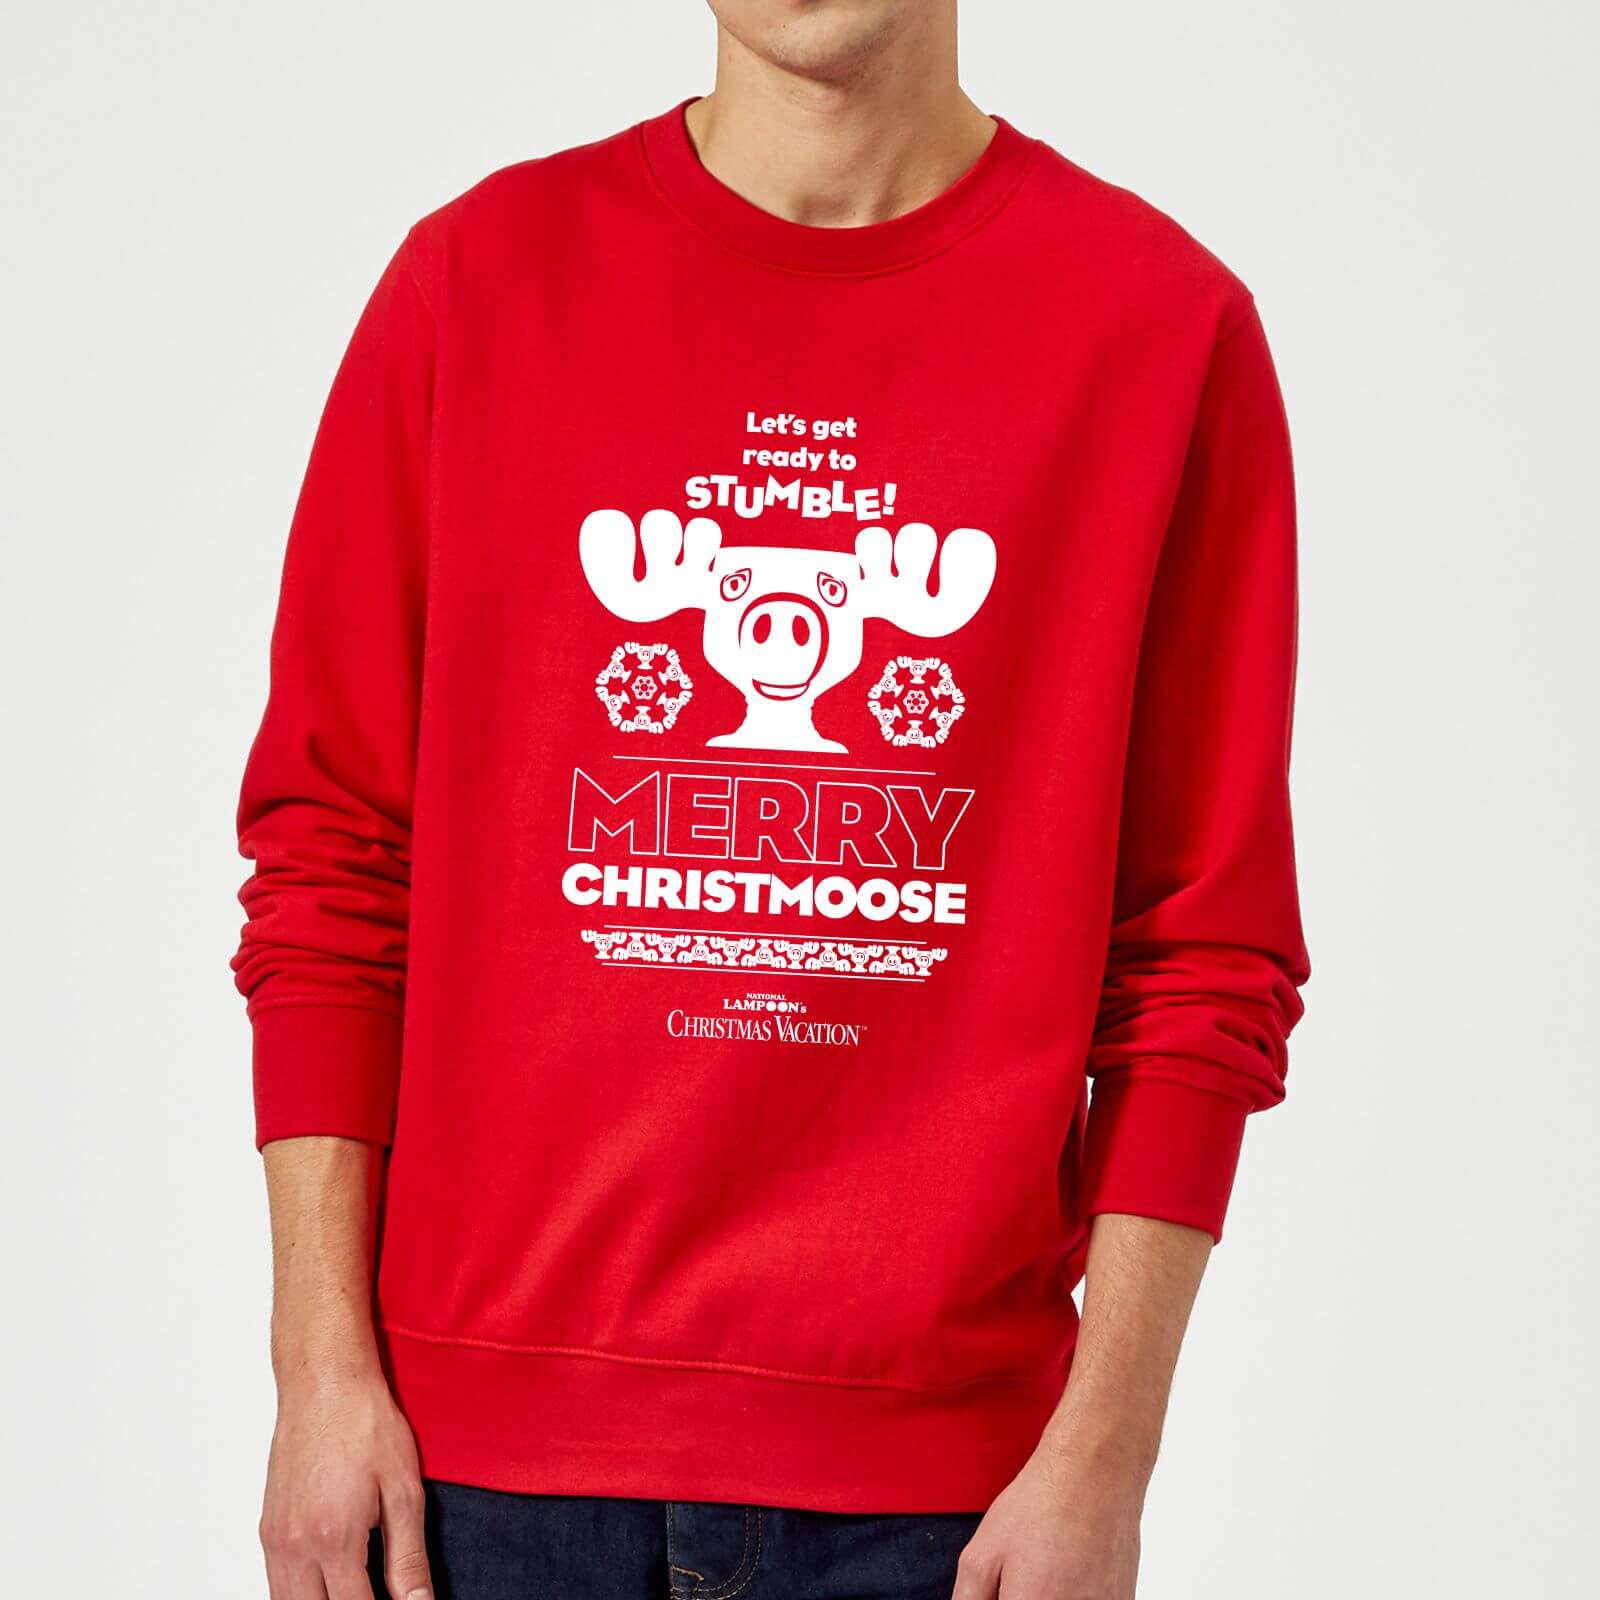 National Lampoon Merry Christmoose Christmas Jumper - Red - S